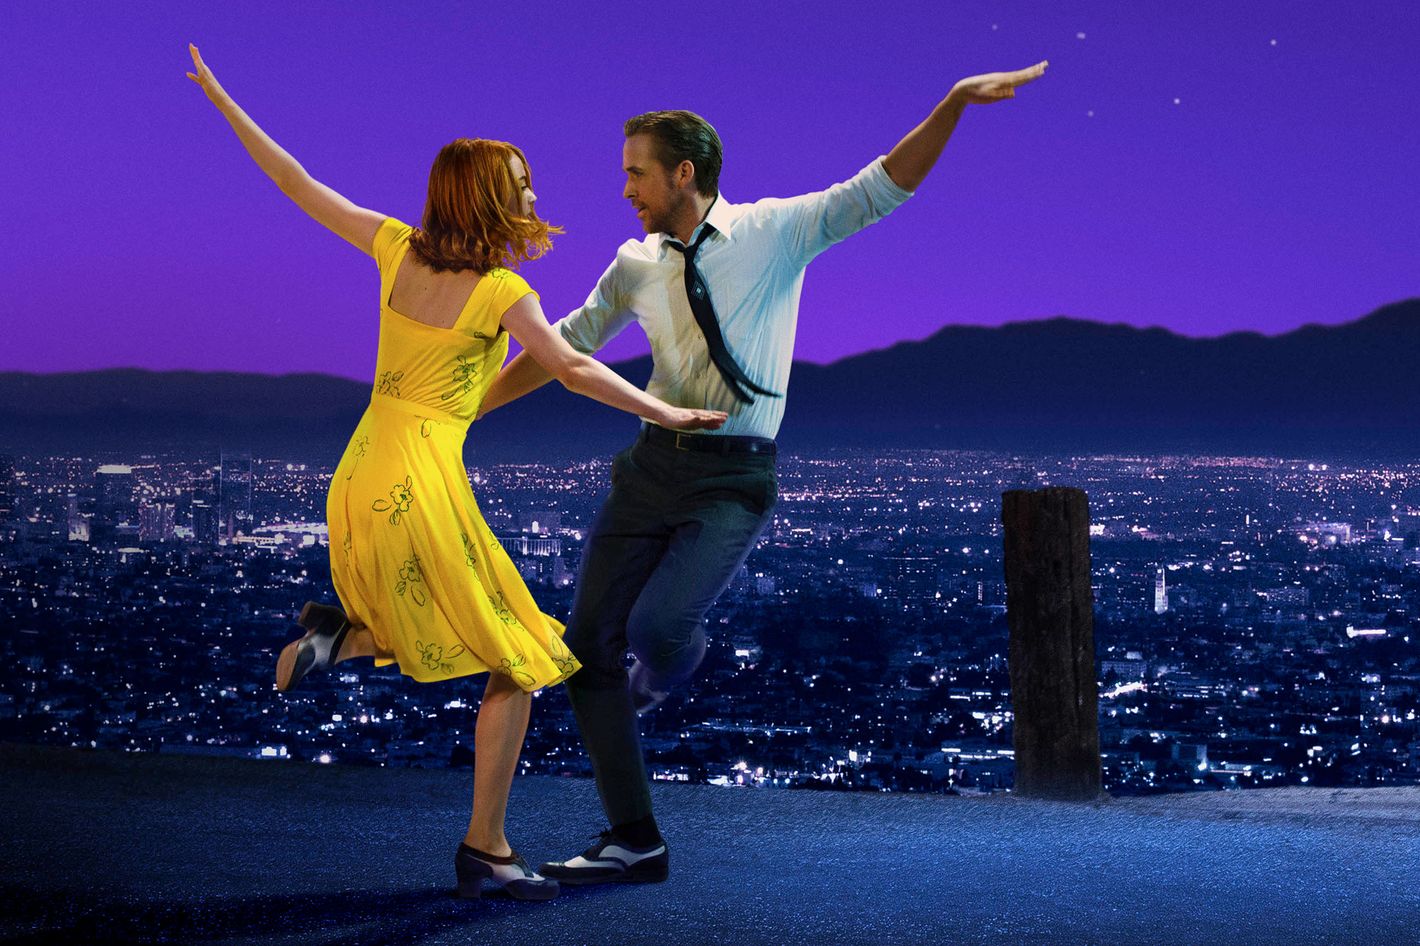 Check Out Some of the Best Movie Musicals Throughout History